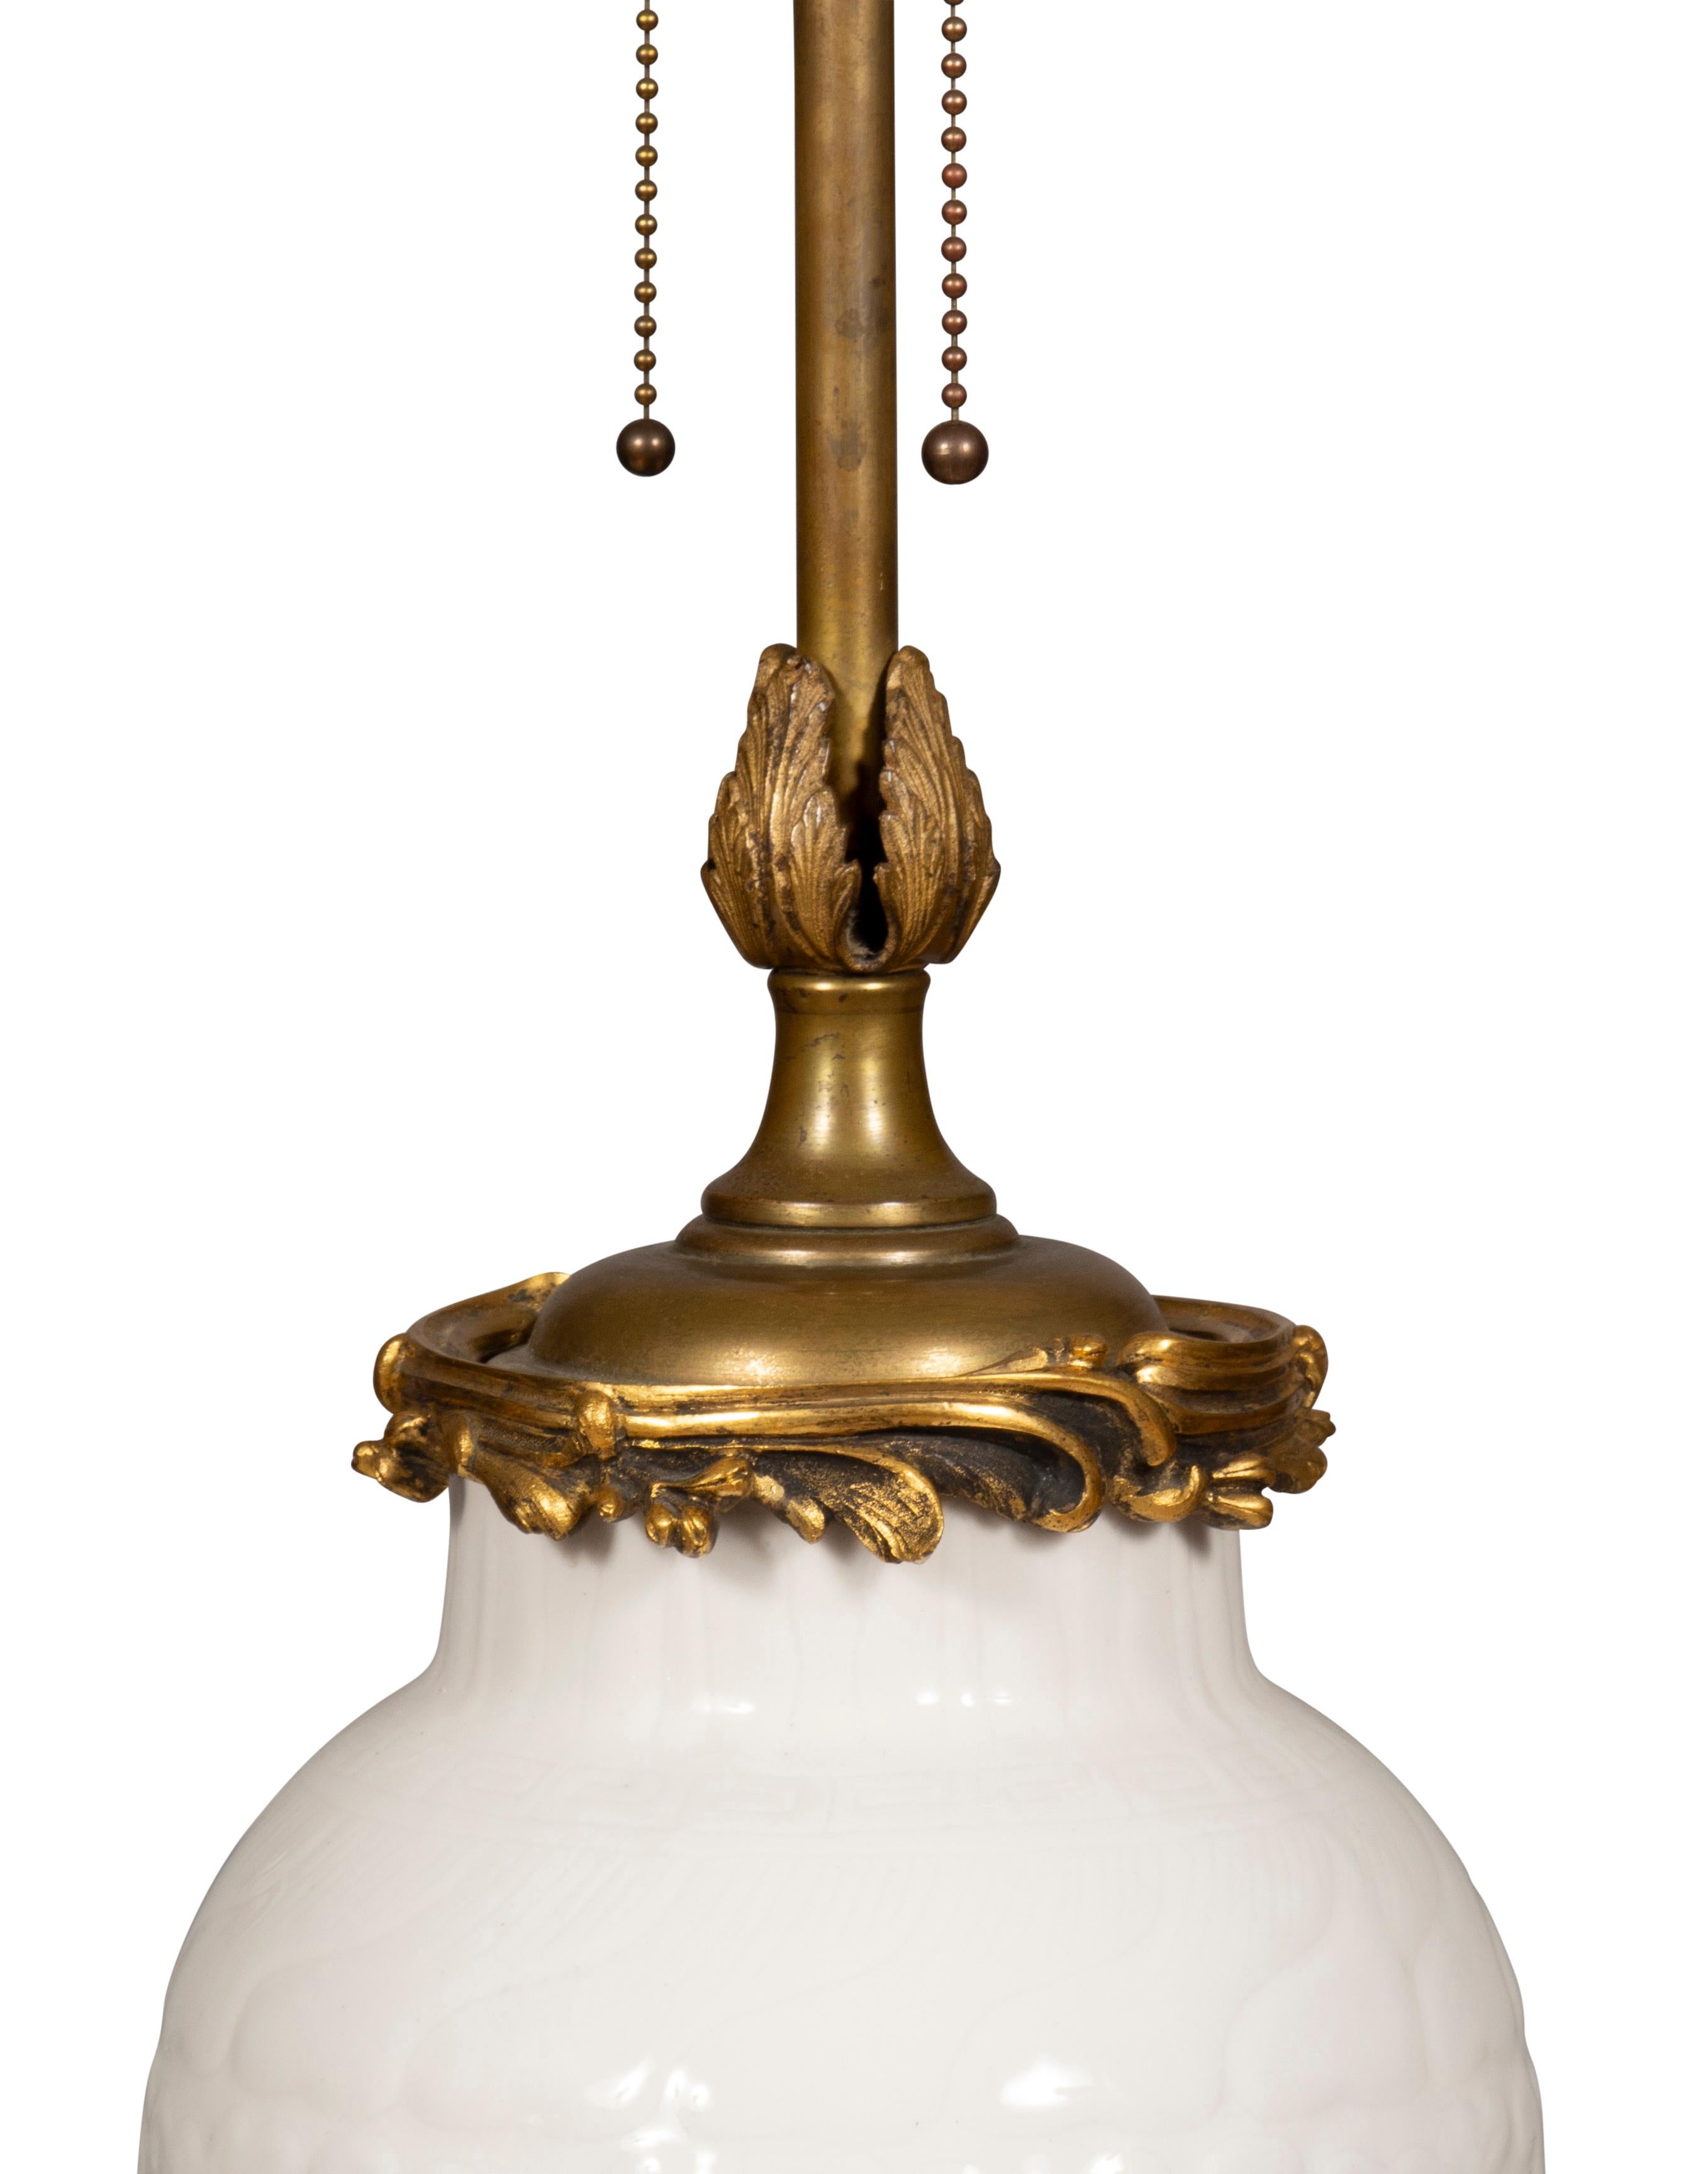 19th Century Pair Of Chinese Blanc De Chine Porcelain Ormolu Mounted Table Lamps